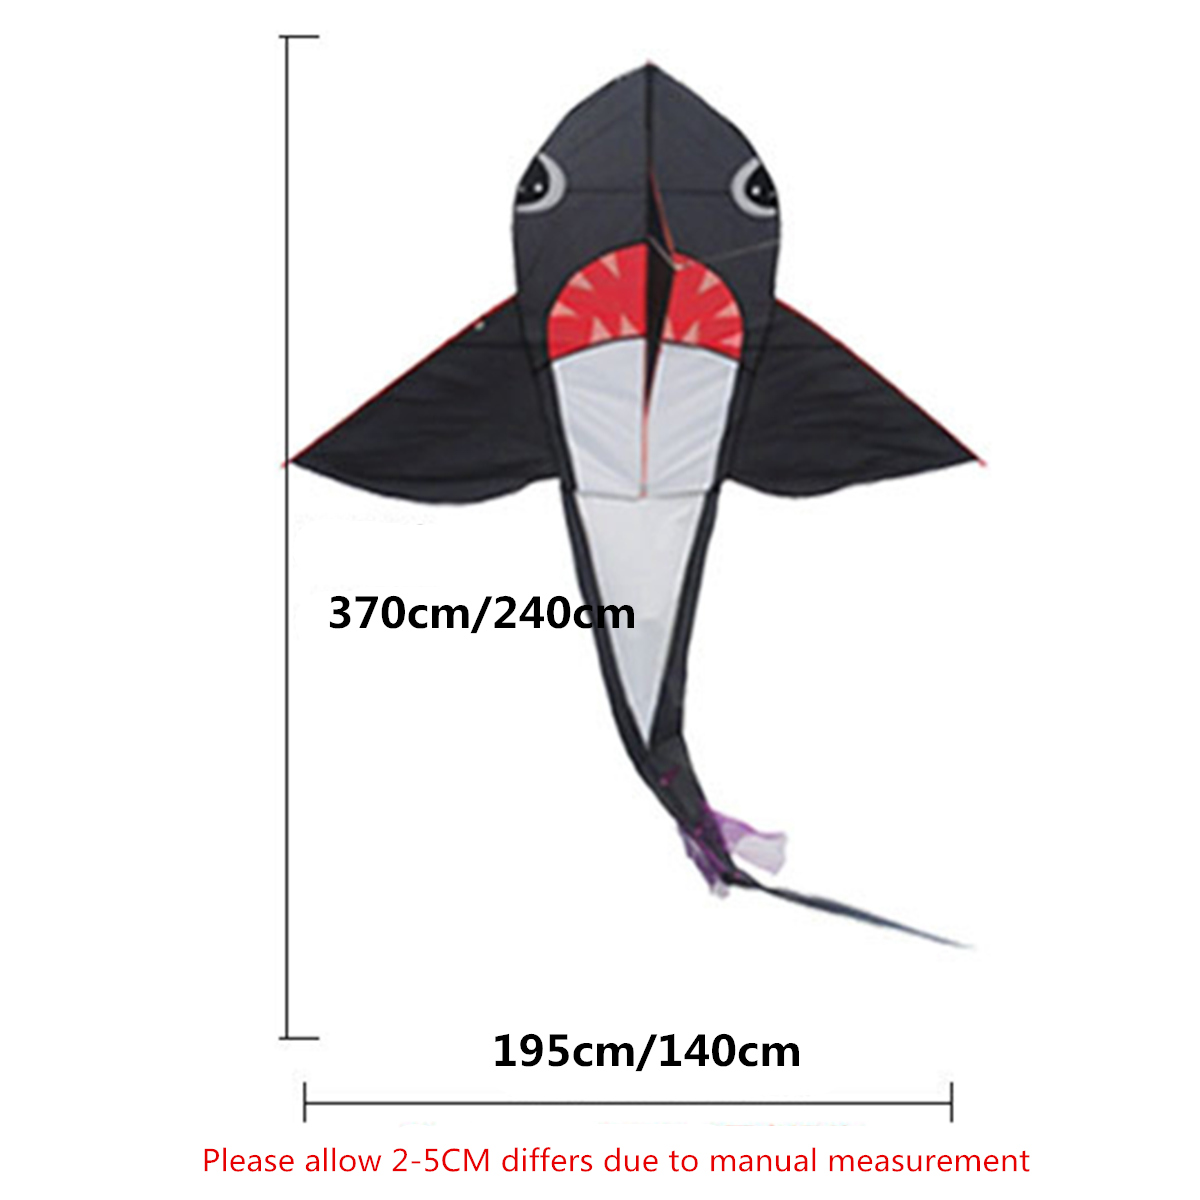 5577-Inches-Big-Size-Shark-Kite-Kid-Outdoor-Play-Toys-Without-Line-Winder-1436719-11